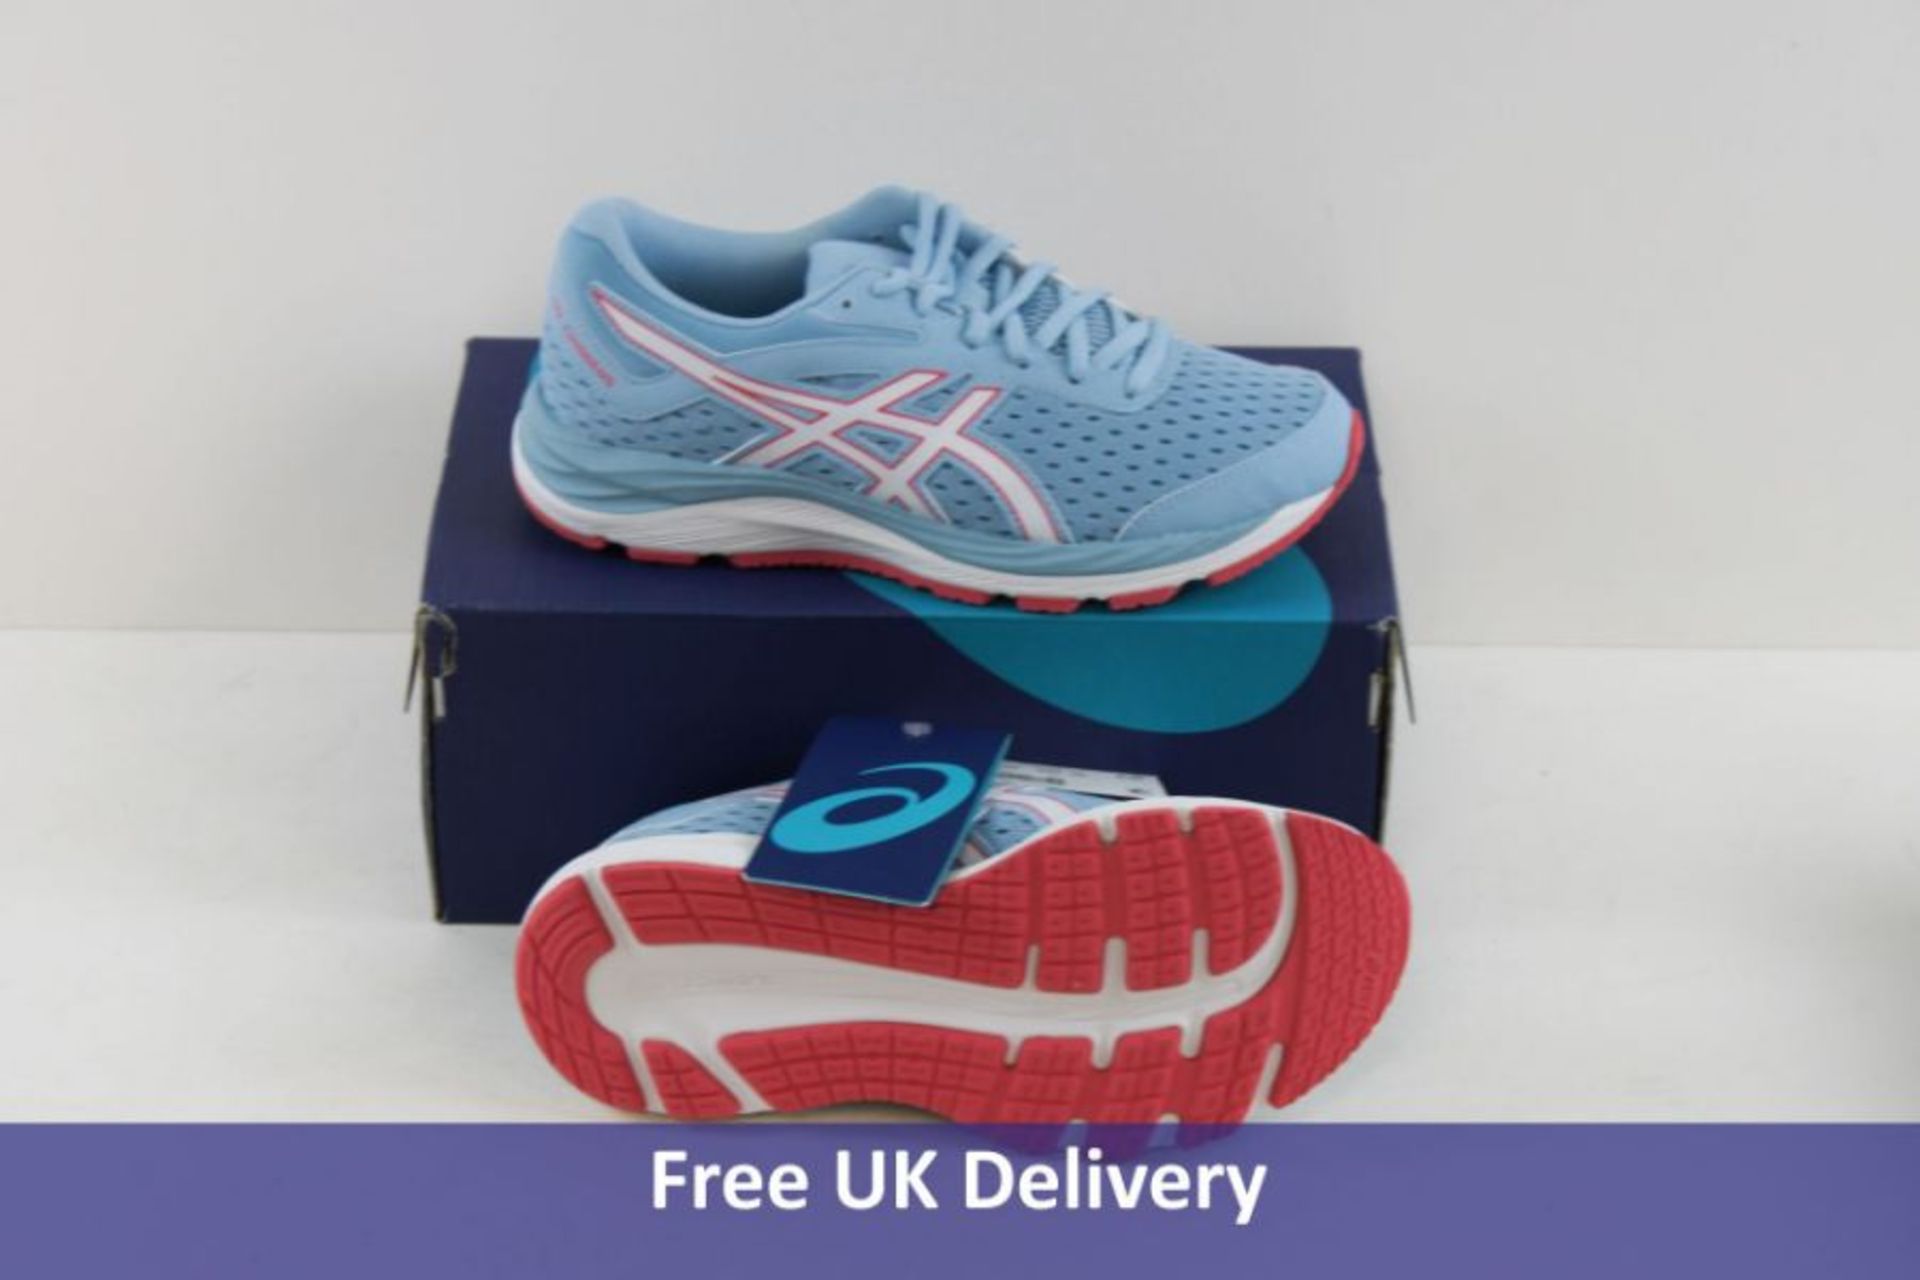 Asics Kids Gel Cumulus 20 GS Trainers, Skylight and White, UK 3.5